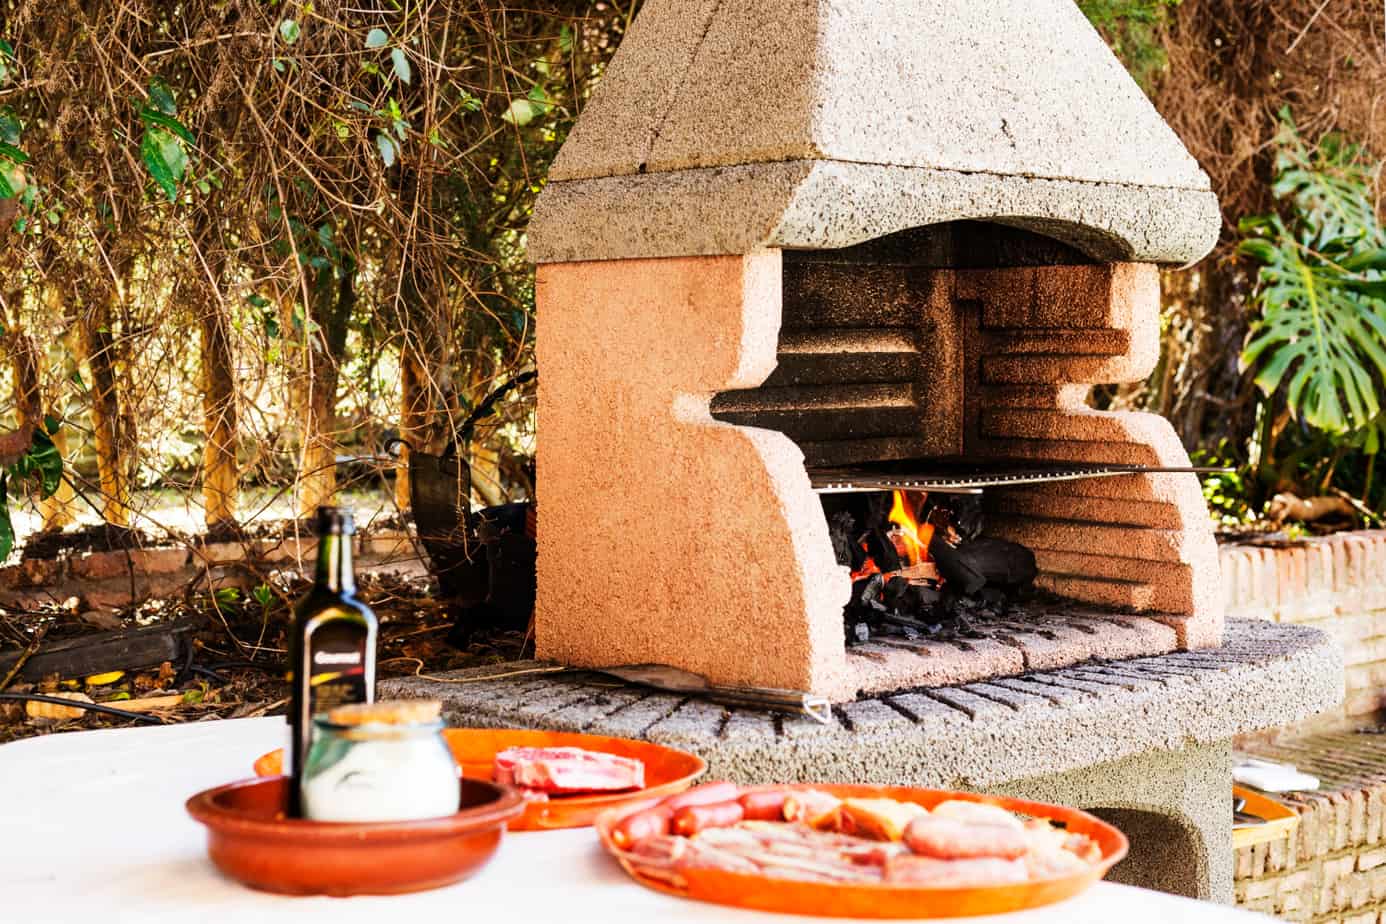 Arrange a place for barbecue and relaxation in the garden!